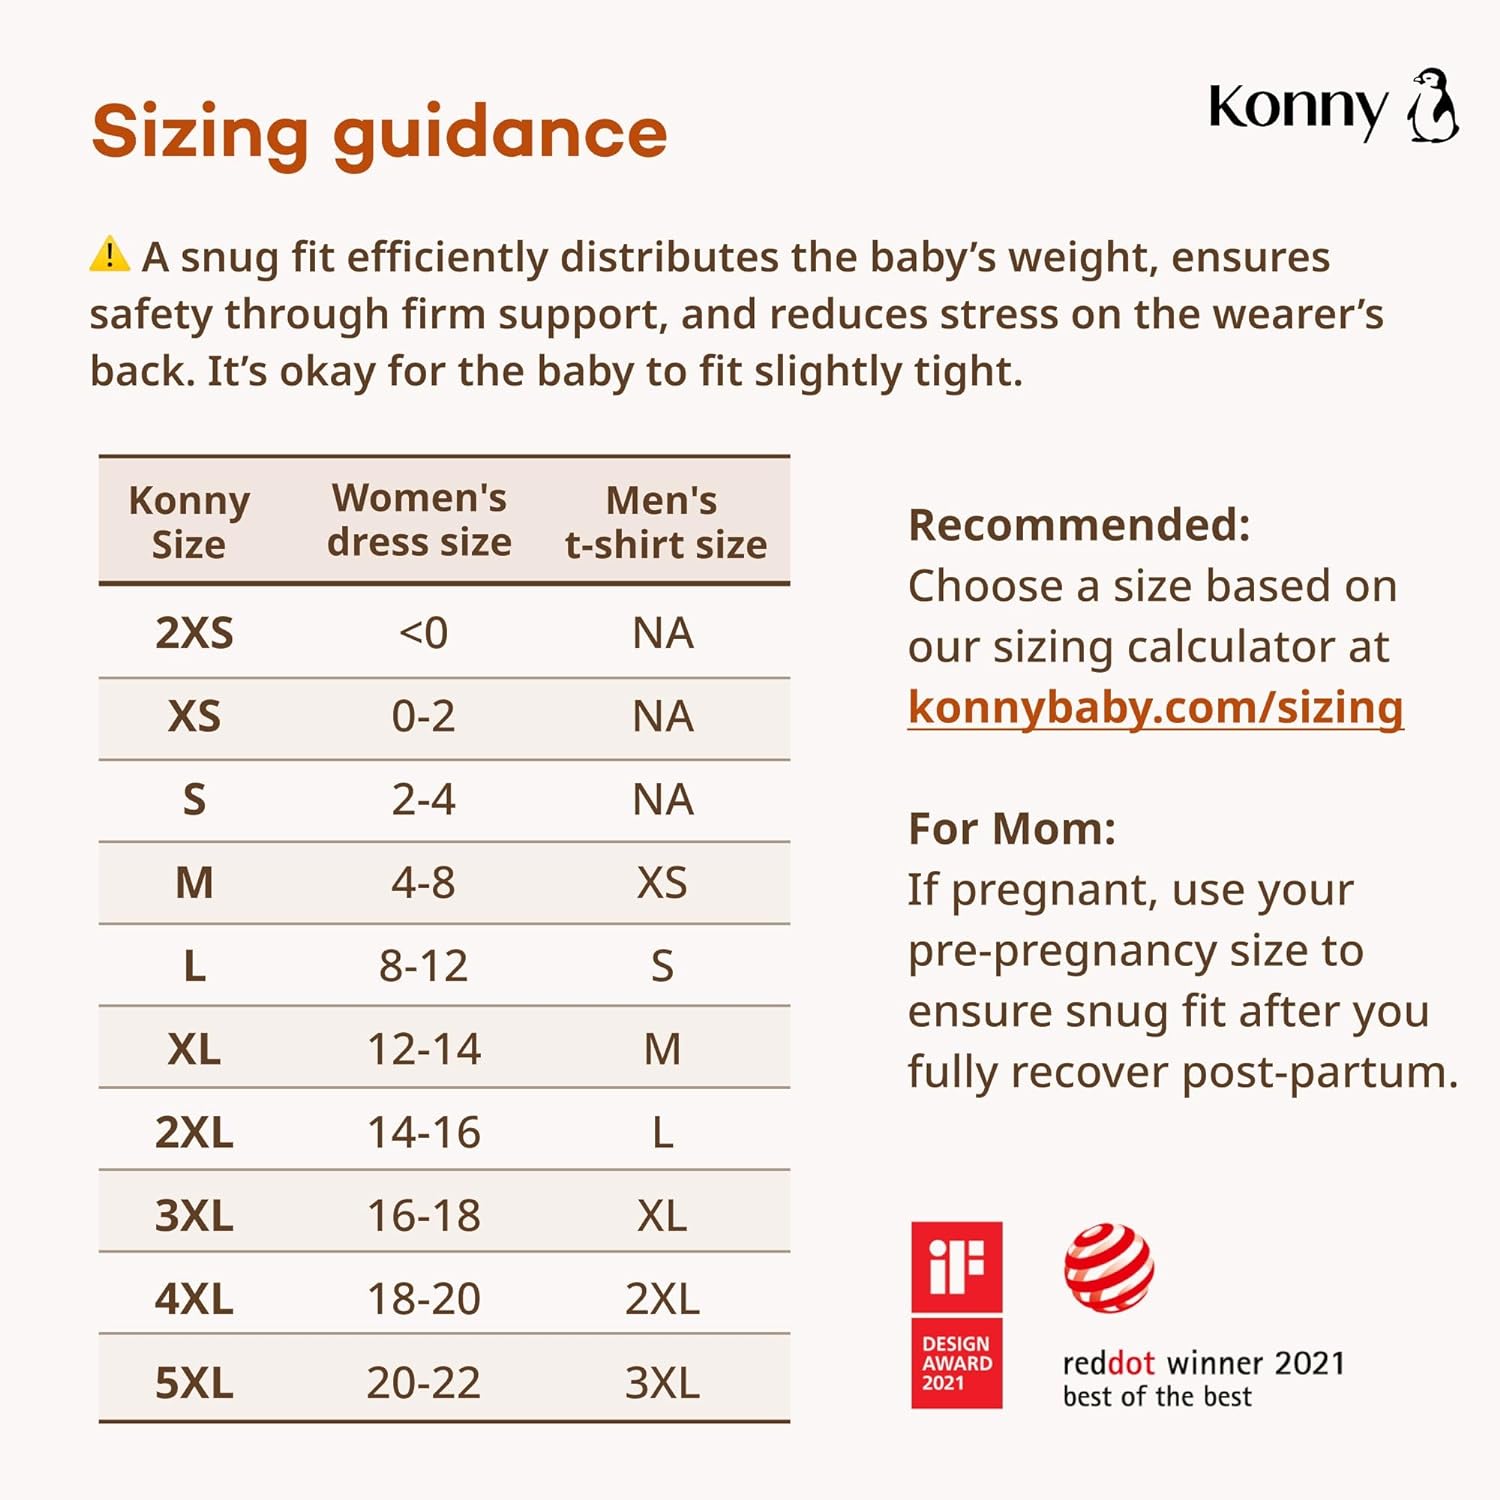 Konny Original Elastech Baby Carrier - Custom Fit Baby Carrier, Hassle-Free, Easy to Carry Baby Carrier, Perfect for Newborns up to 20 kg (Beige, 3XL)